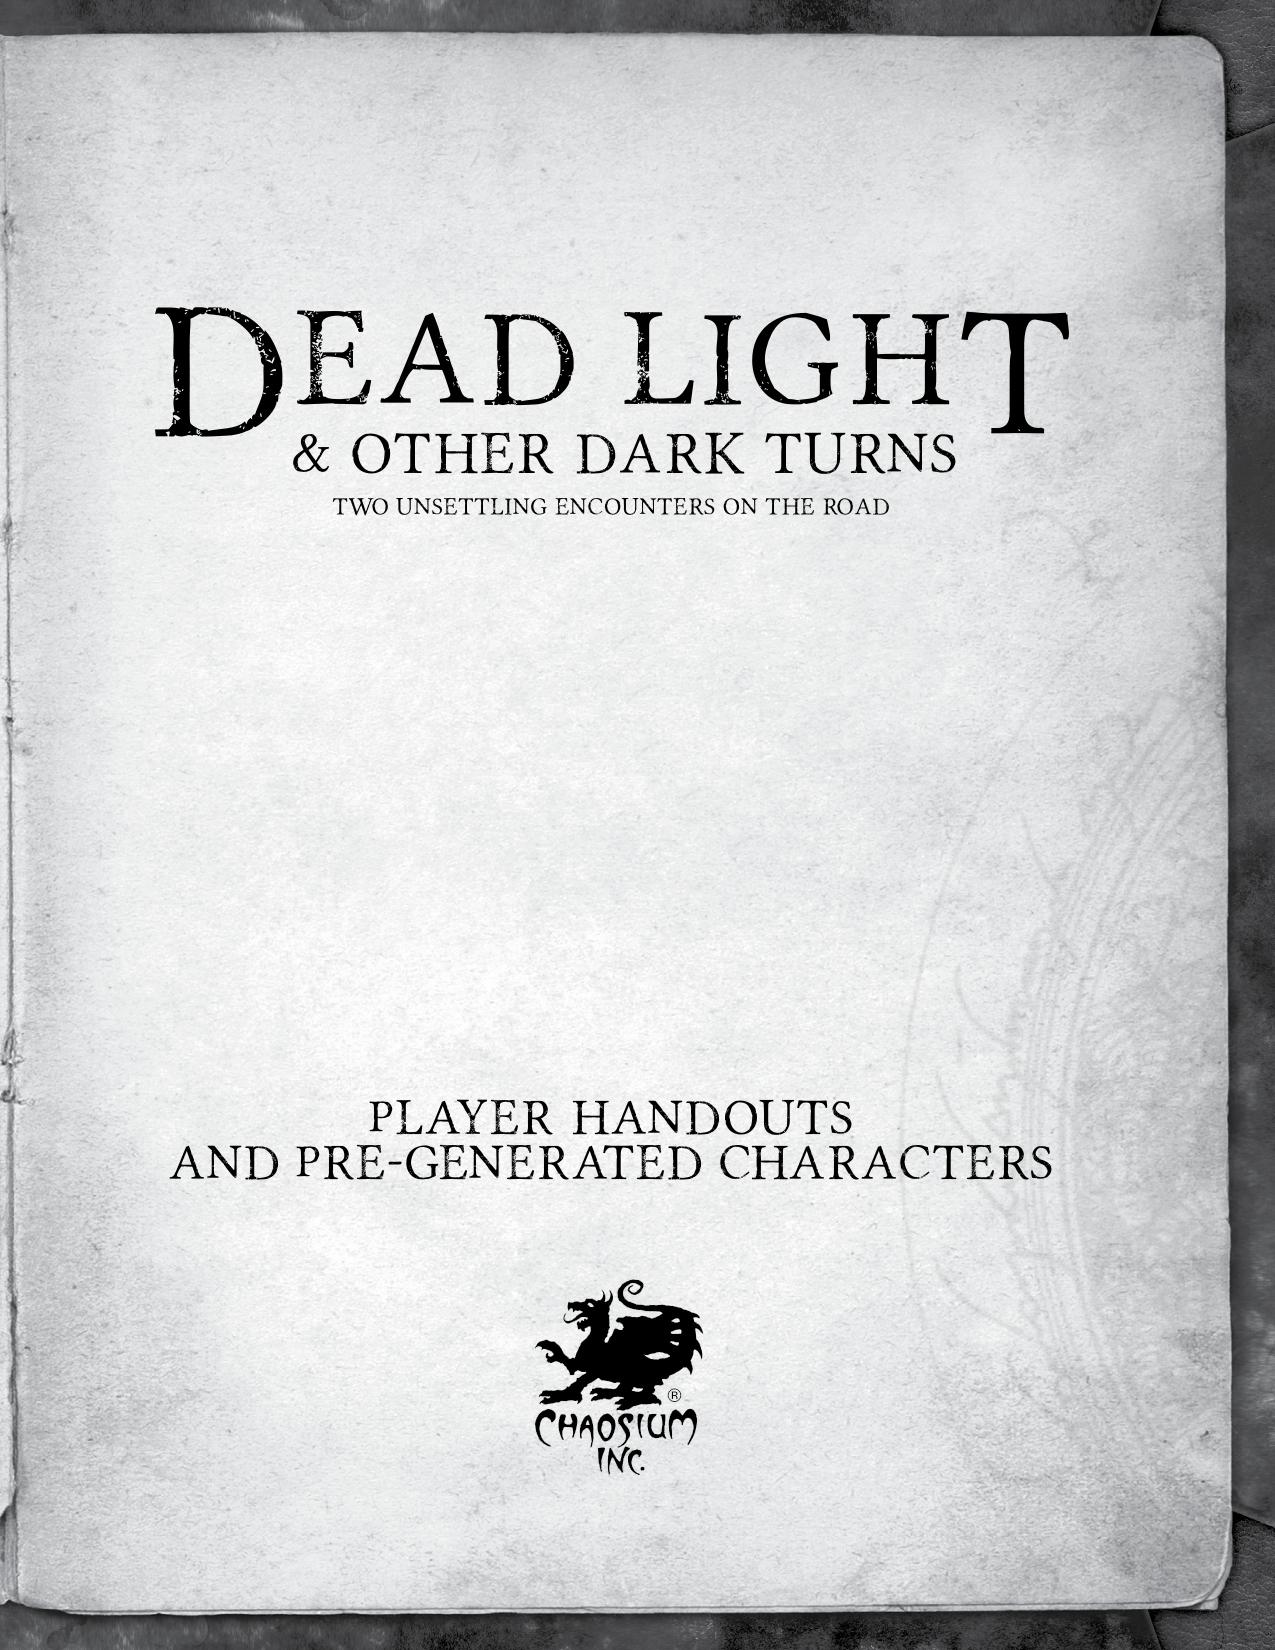 Call of Cthulhu - Dead Light & Other Dark Turns